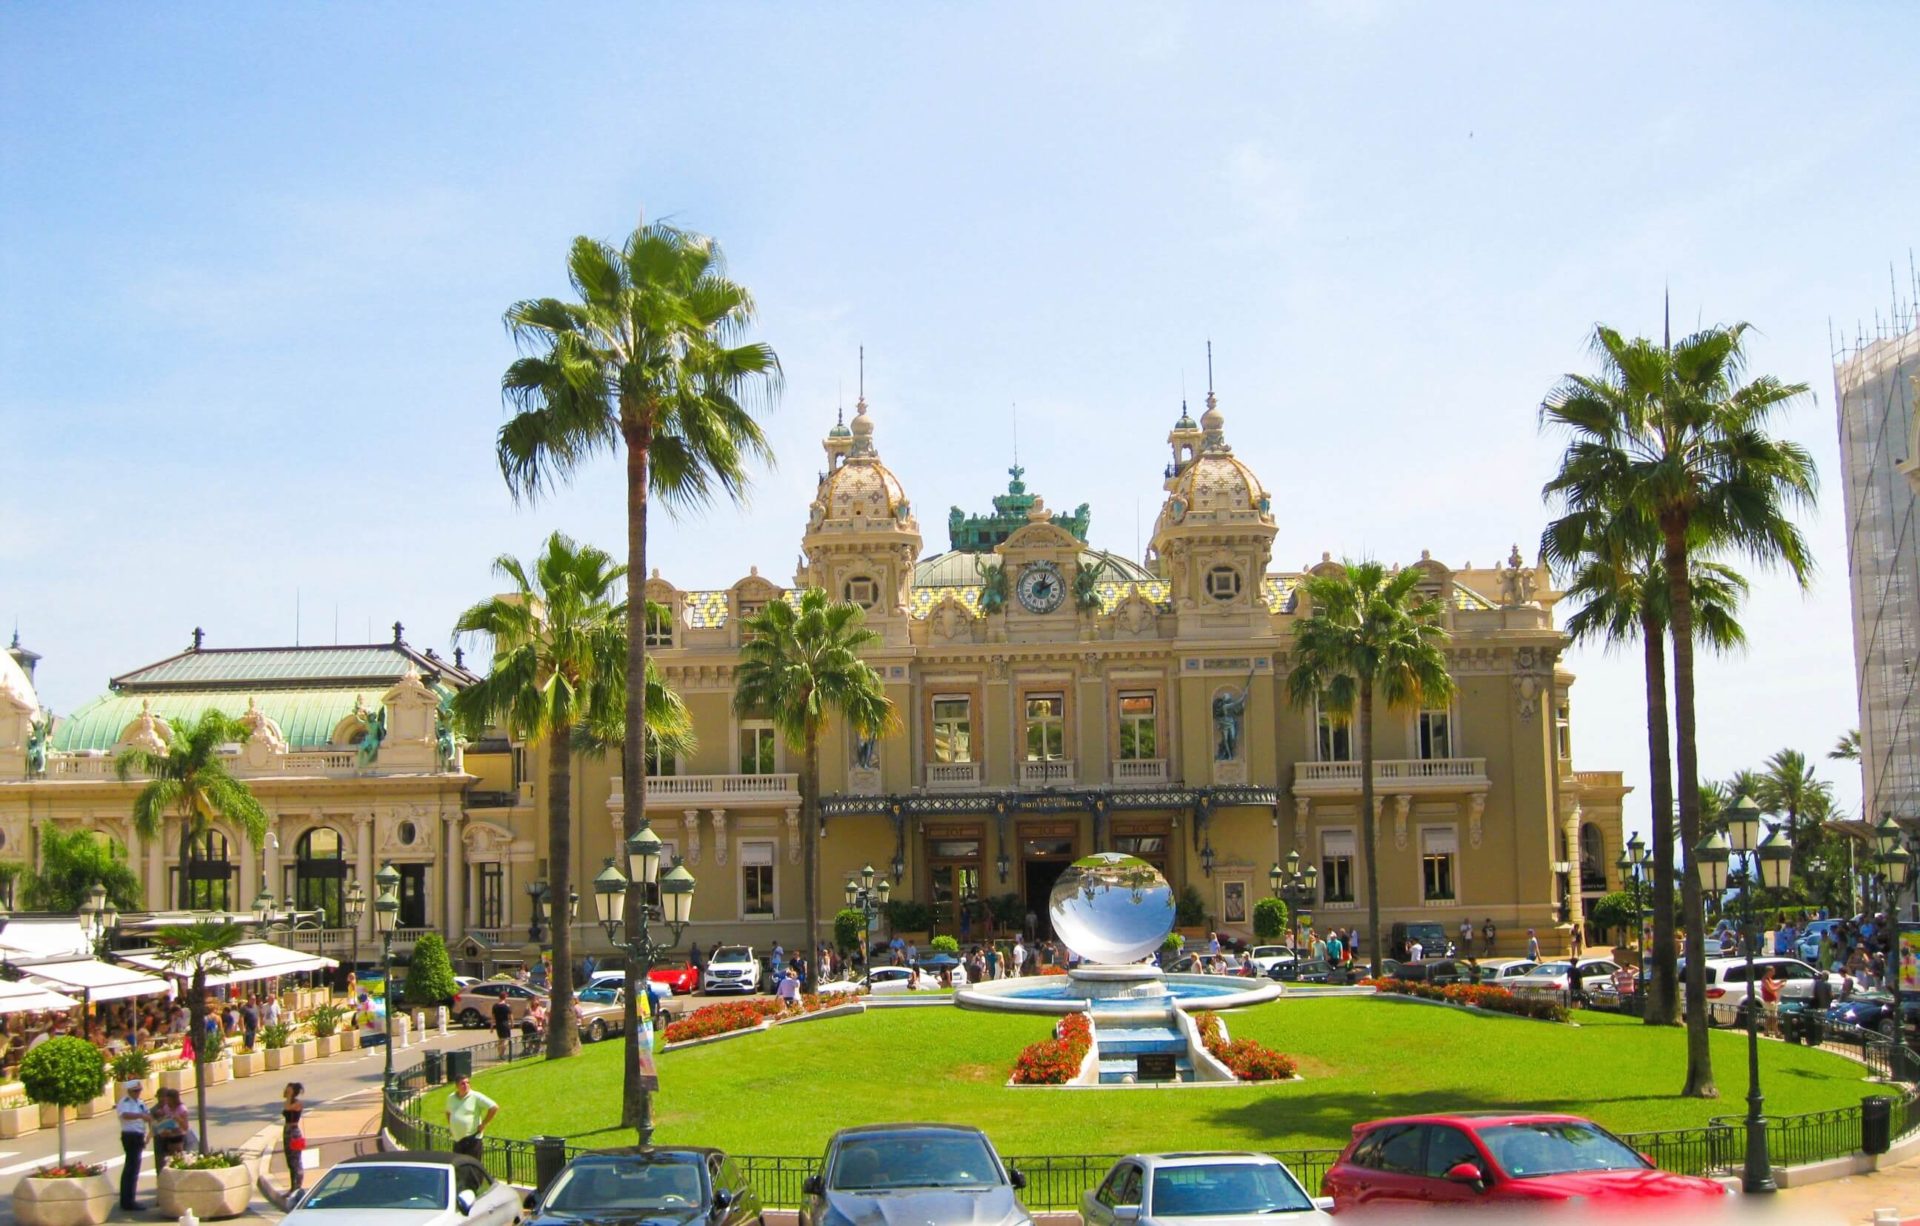 Monte Carlo Casino A Day Trip To Monaco From Nice